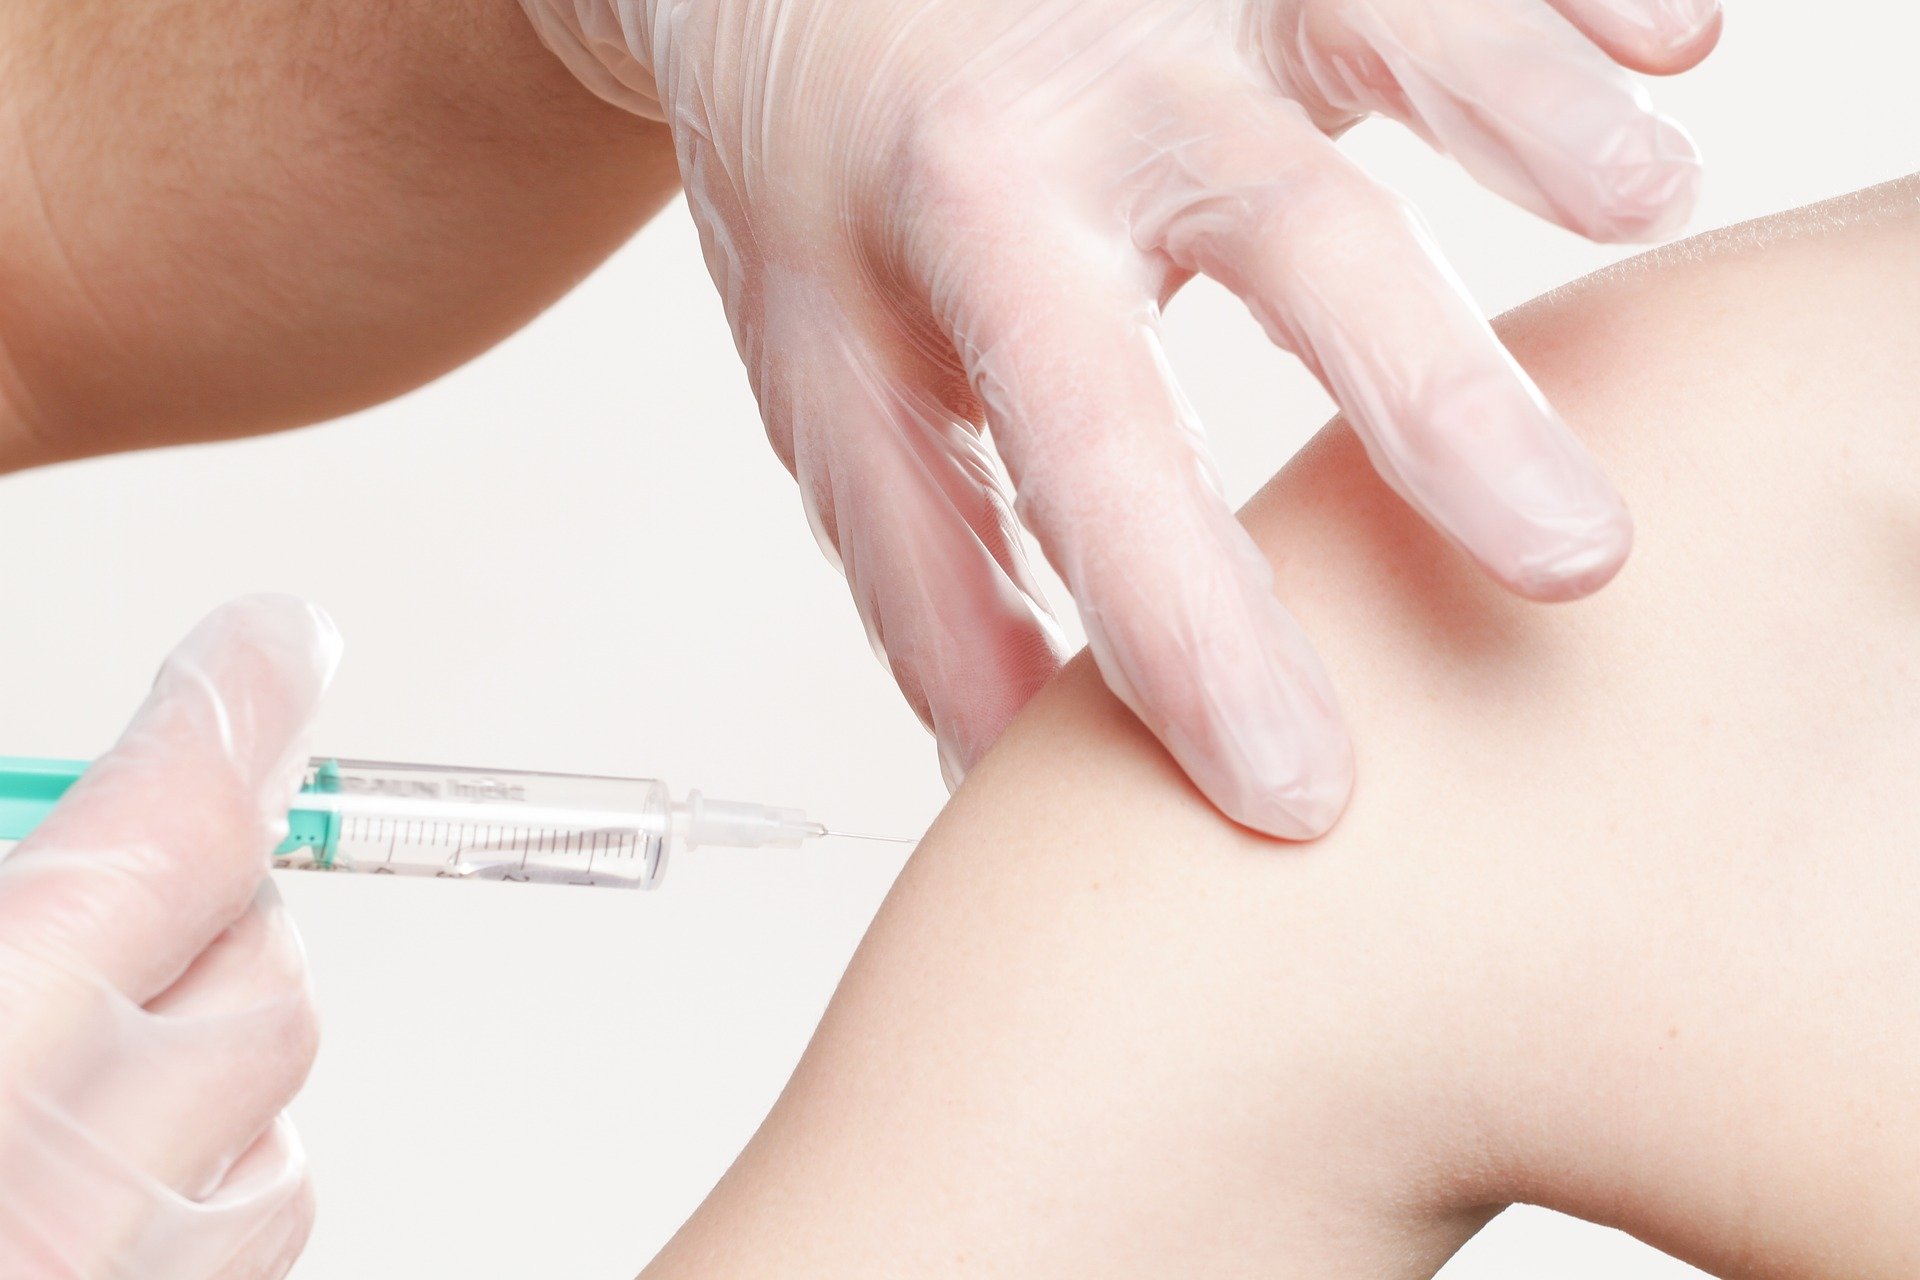 Posed photo of hands injecting a syringe into an arm.